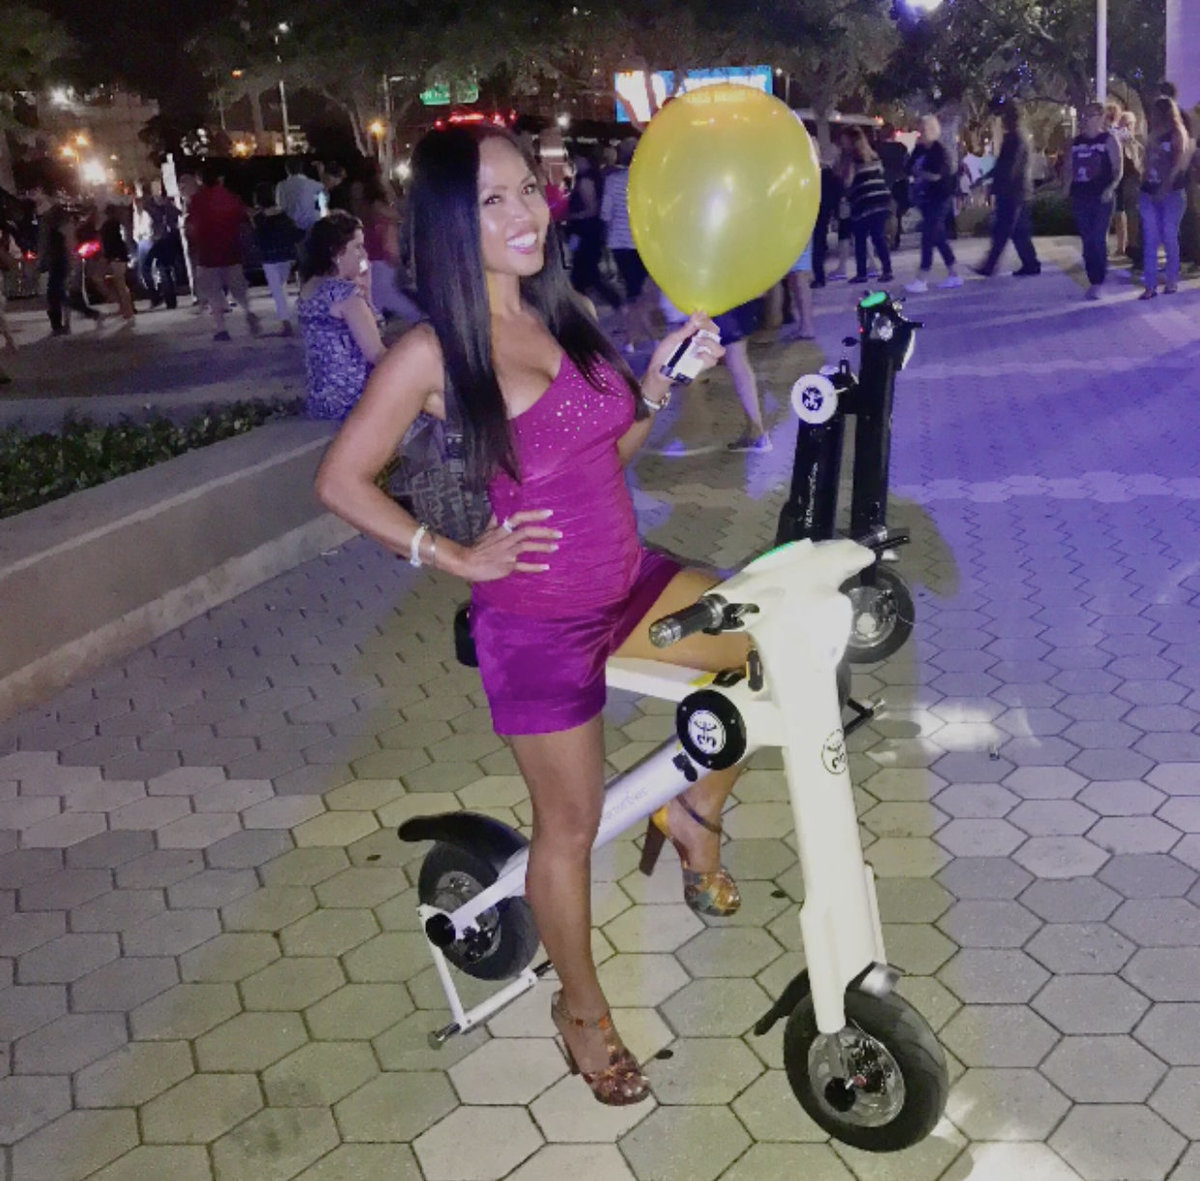 Lady with ballon having night out on the town on White Go-Bike M1